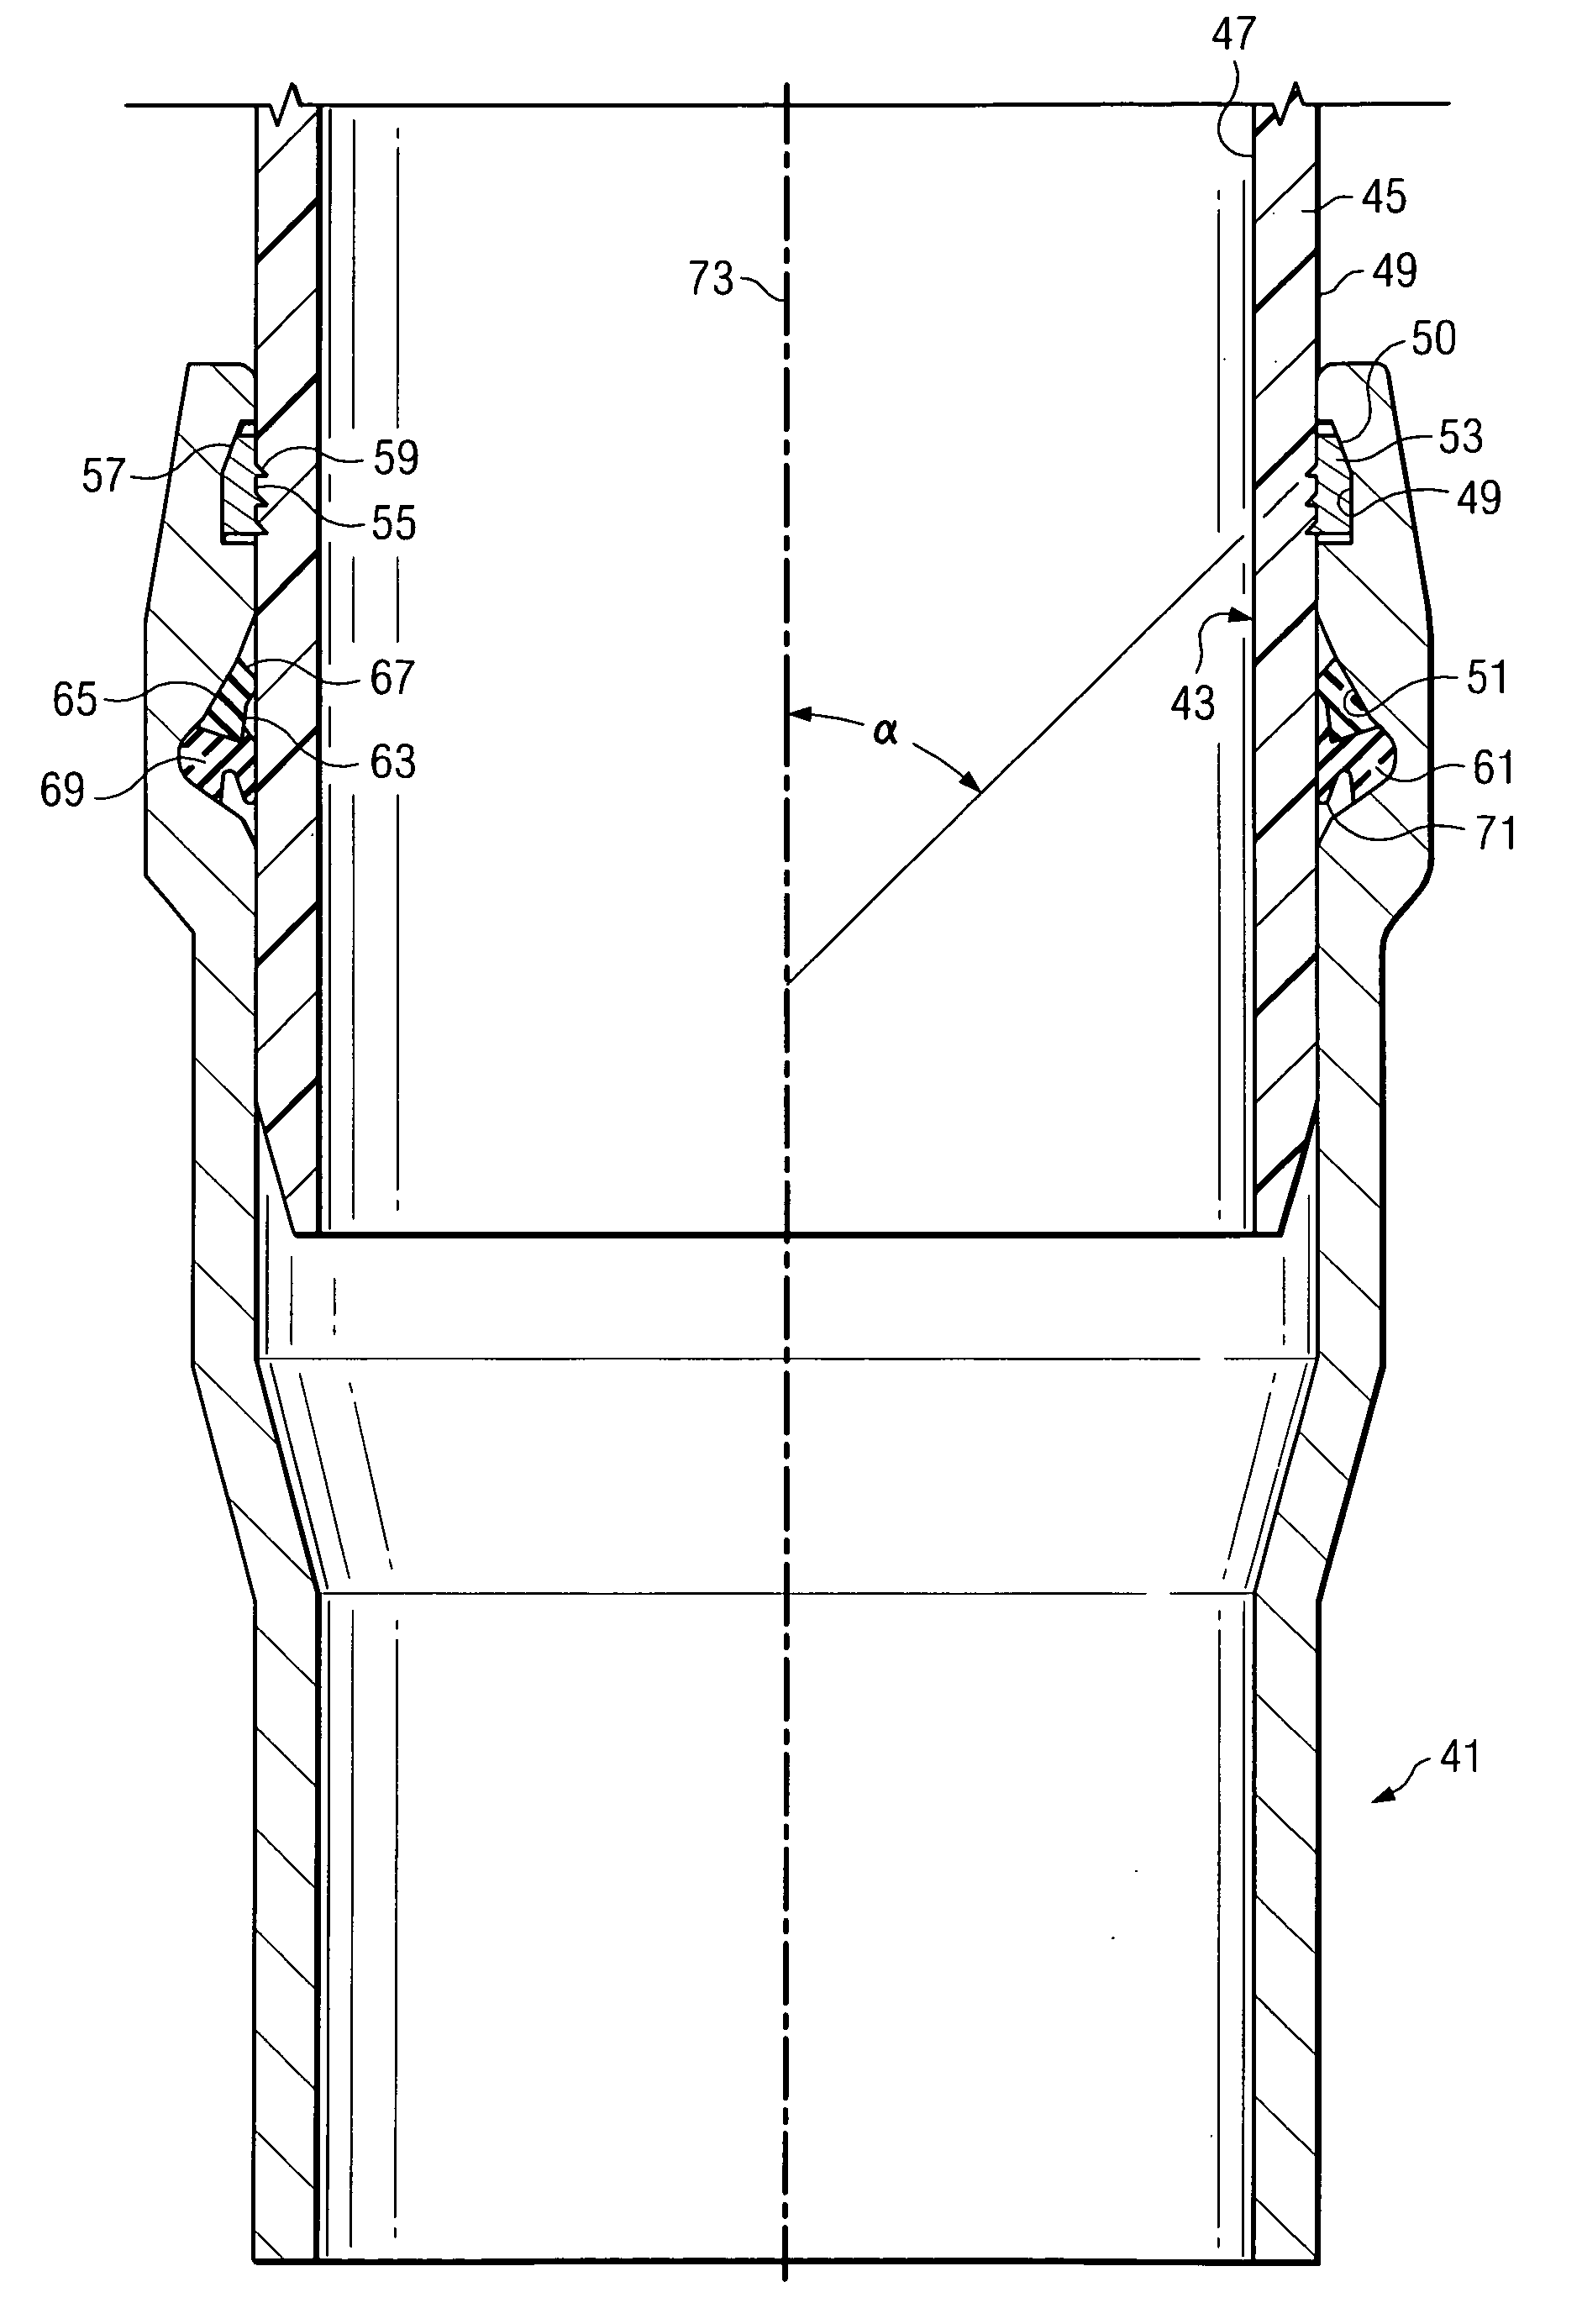 Self restrained joint for ductile iron pipe and fittings